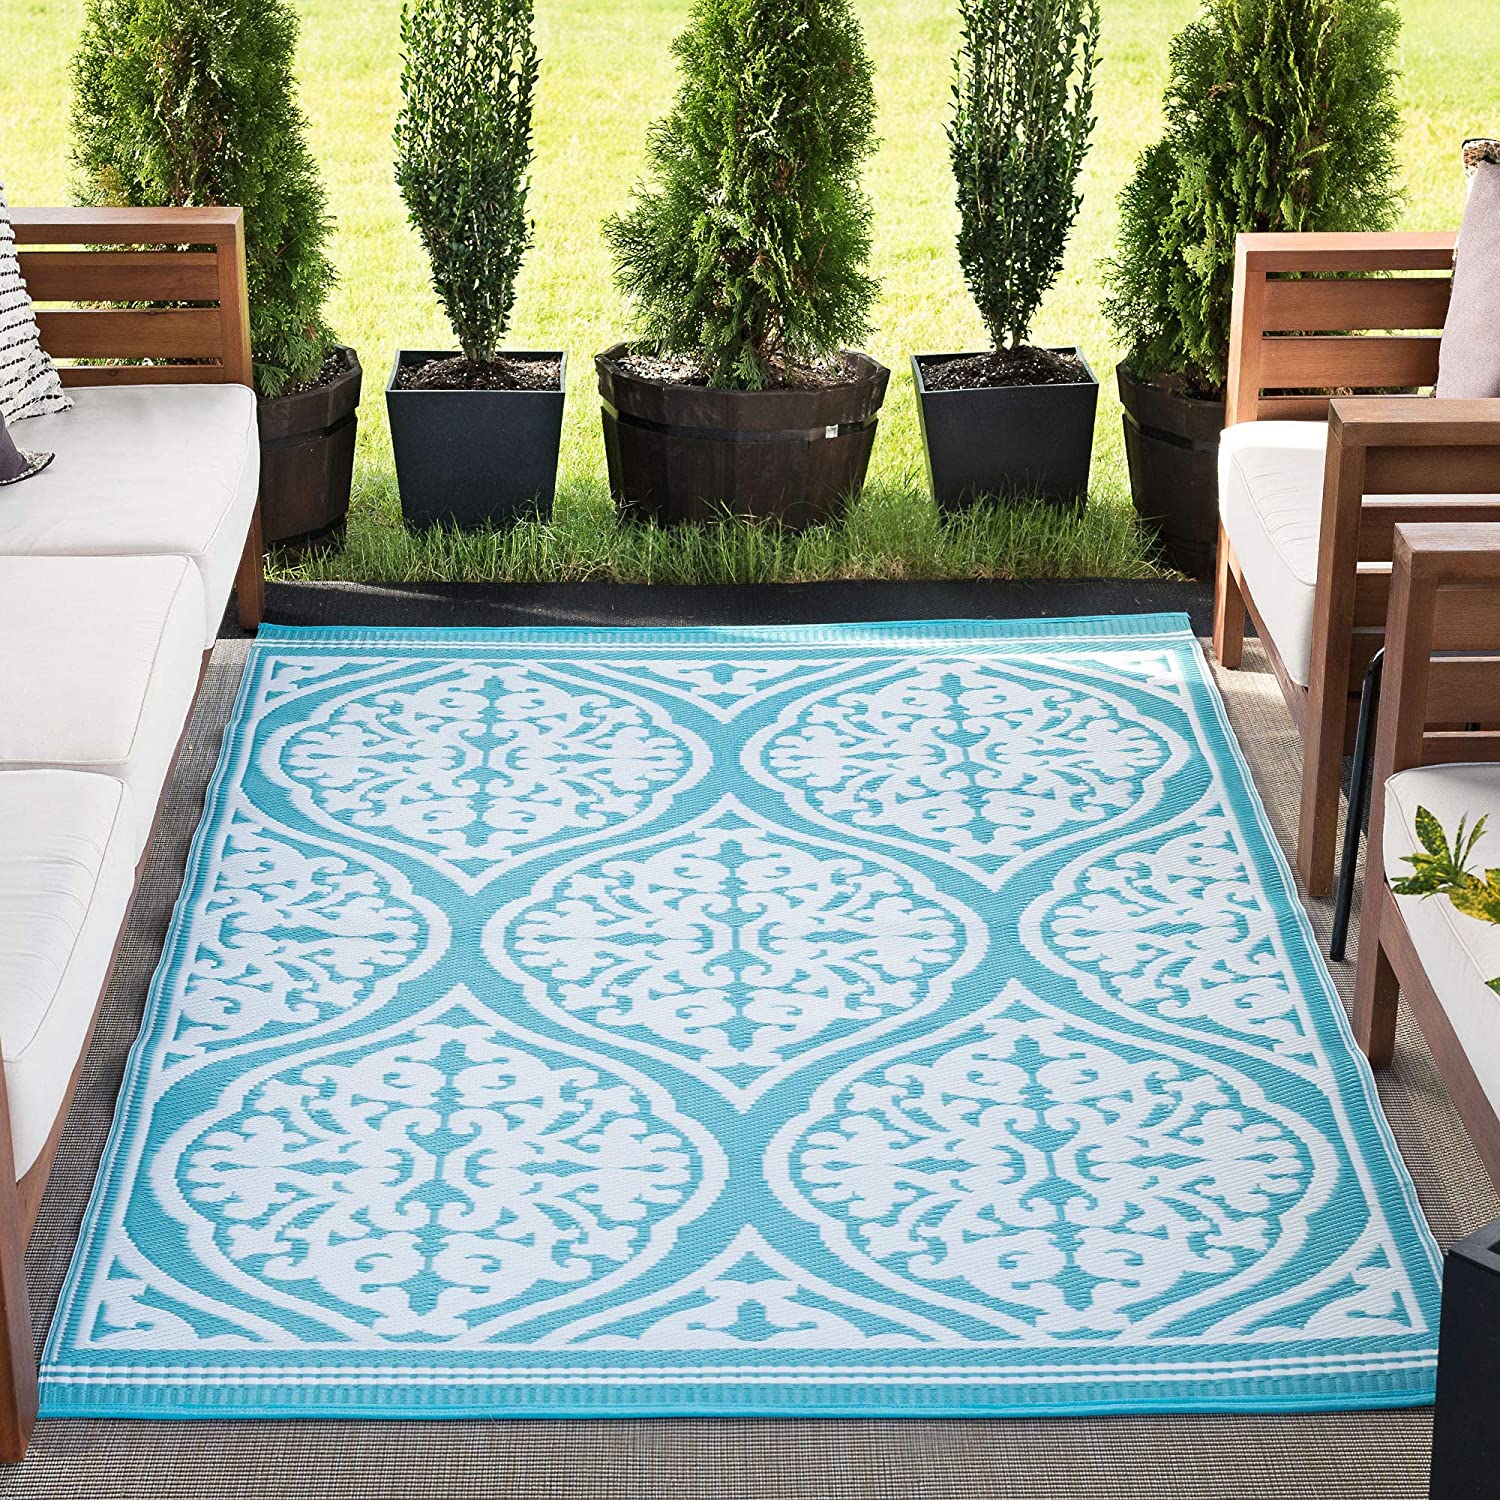 Kingman Aqua Reversible Plastic Straw Large Outdoor Area Rug 8x10 for Patios Garden Picnic Camping Mats Waterproof and Washable